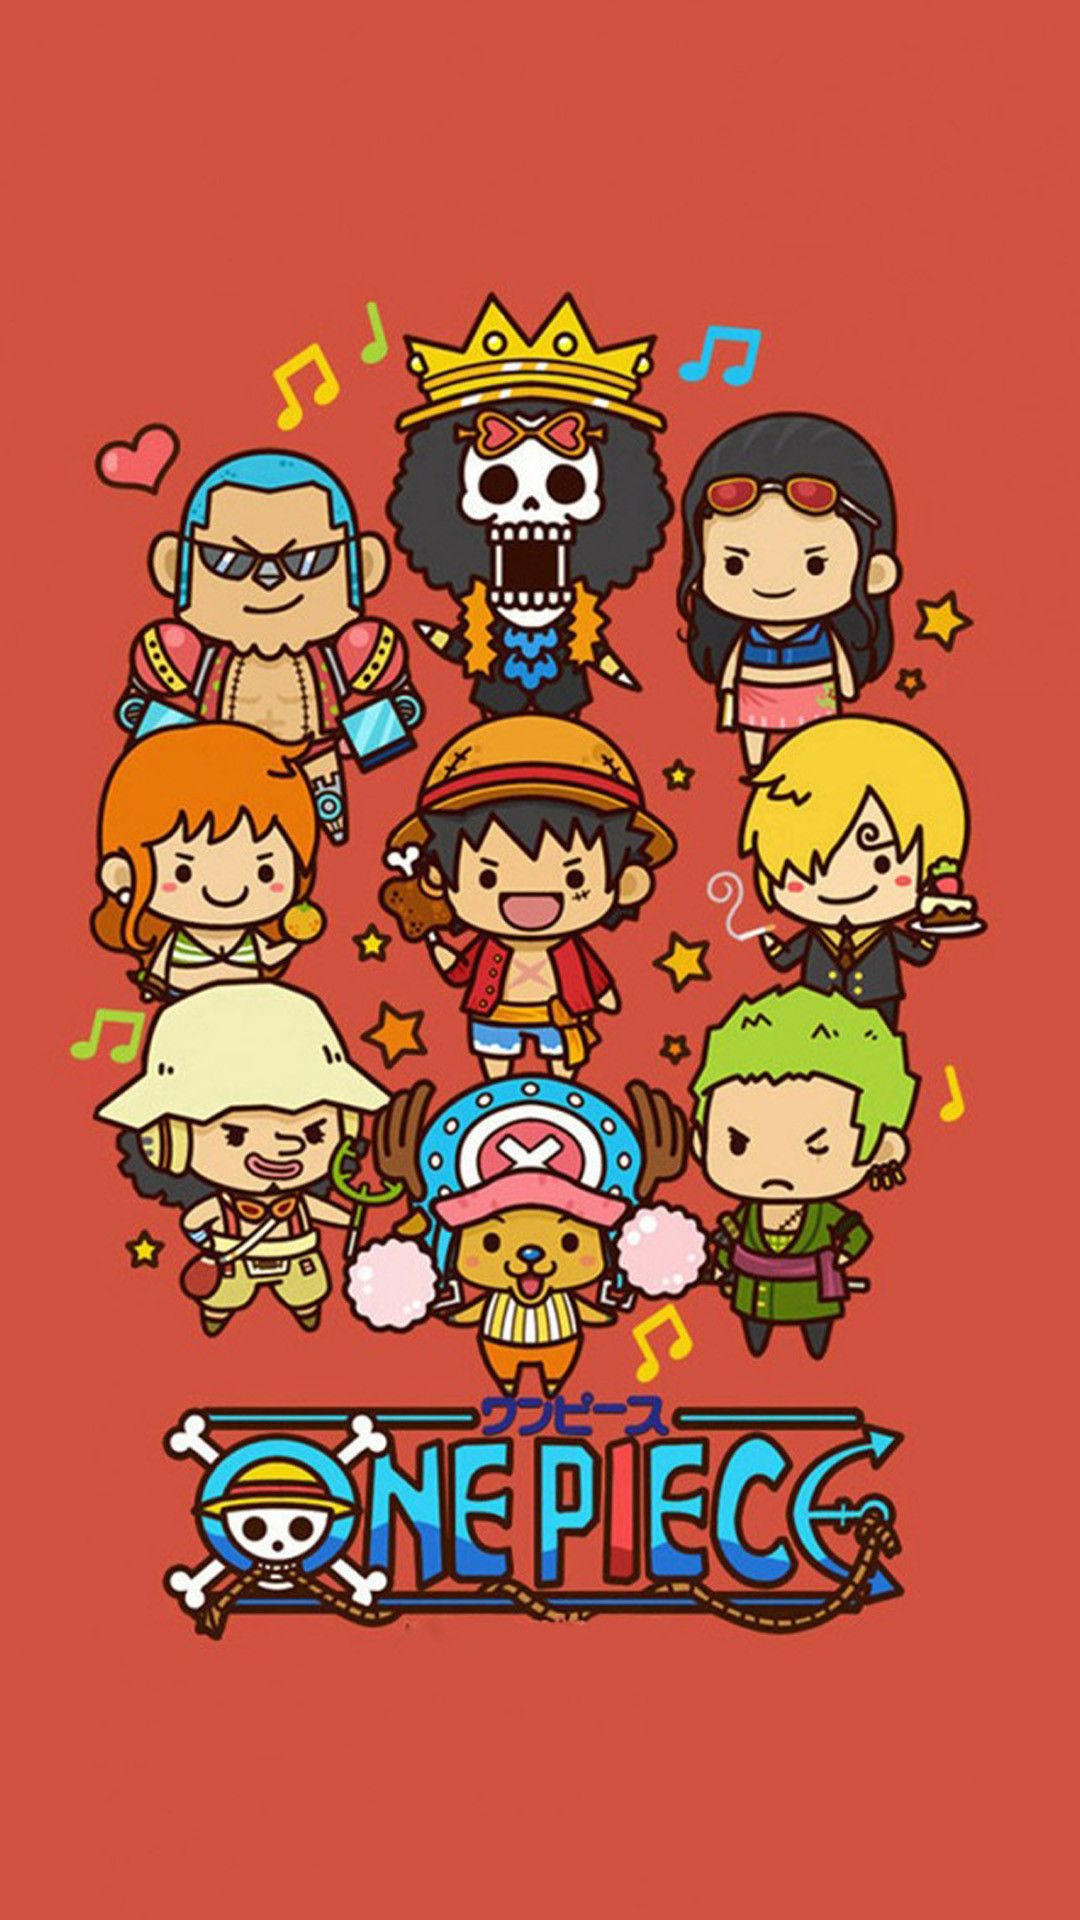 Cute Lovely One Piece Cartoon Poster iPhone 6 Wallpaper Piece Wallpaper 4k Phone HD Wallpaper